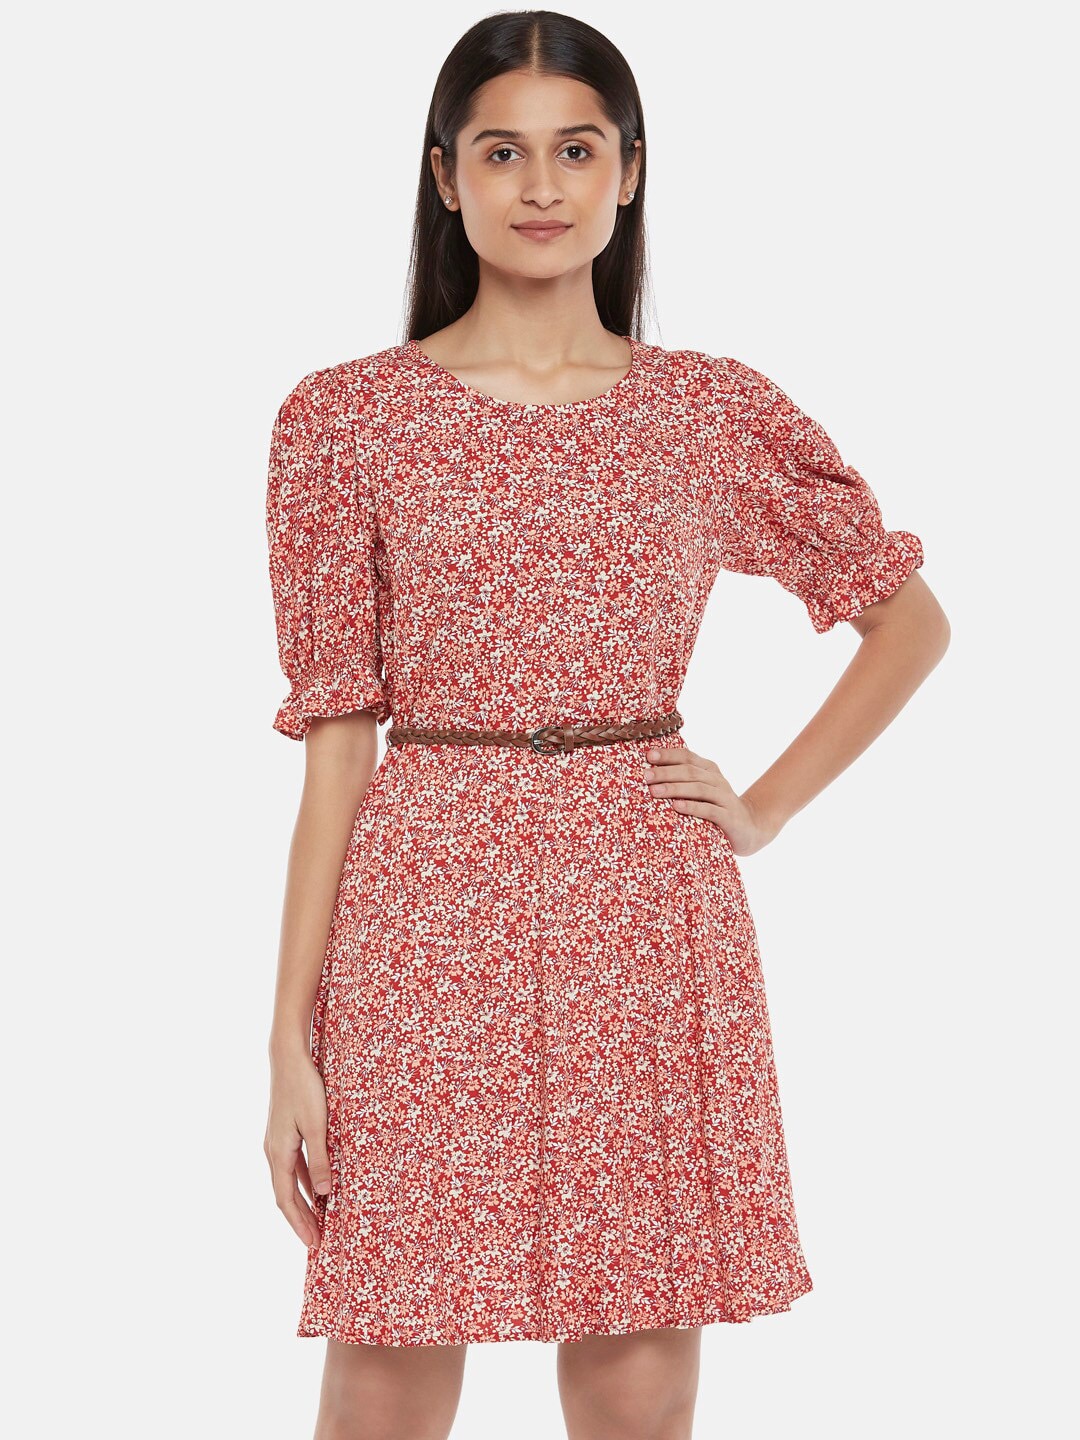 Honey by Pantaloons Rust Floral Dress Price in India